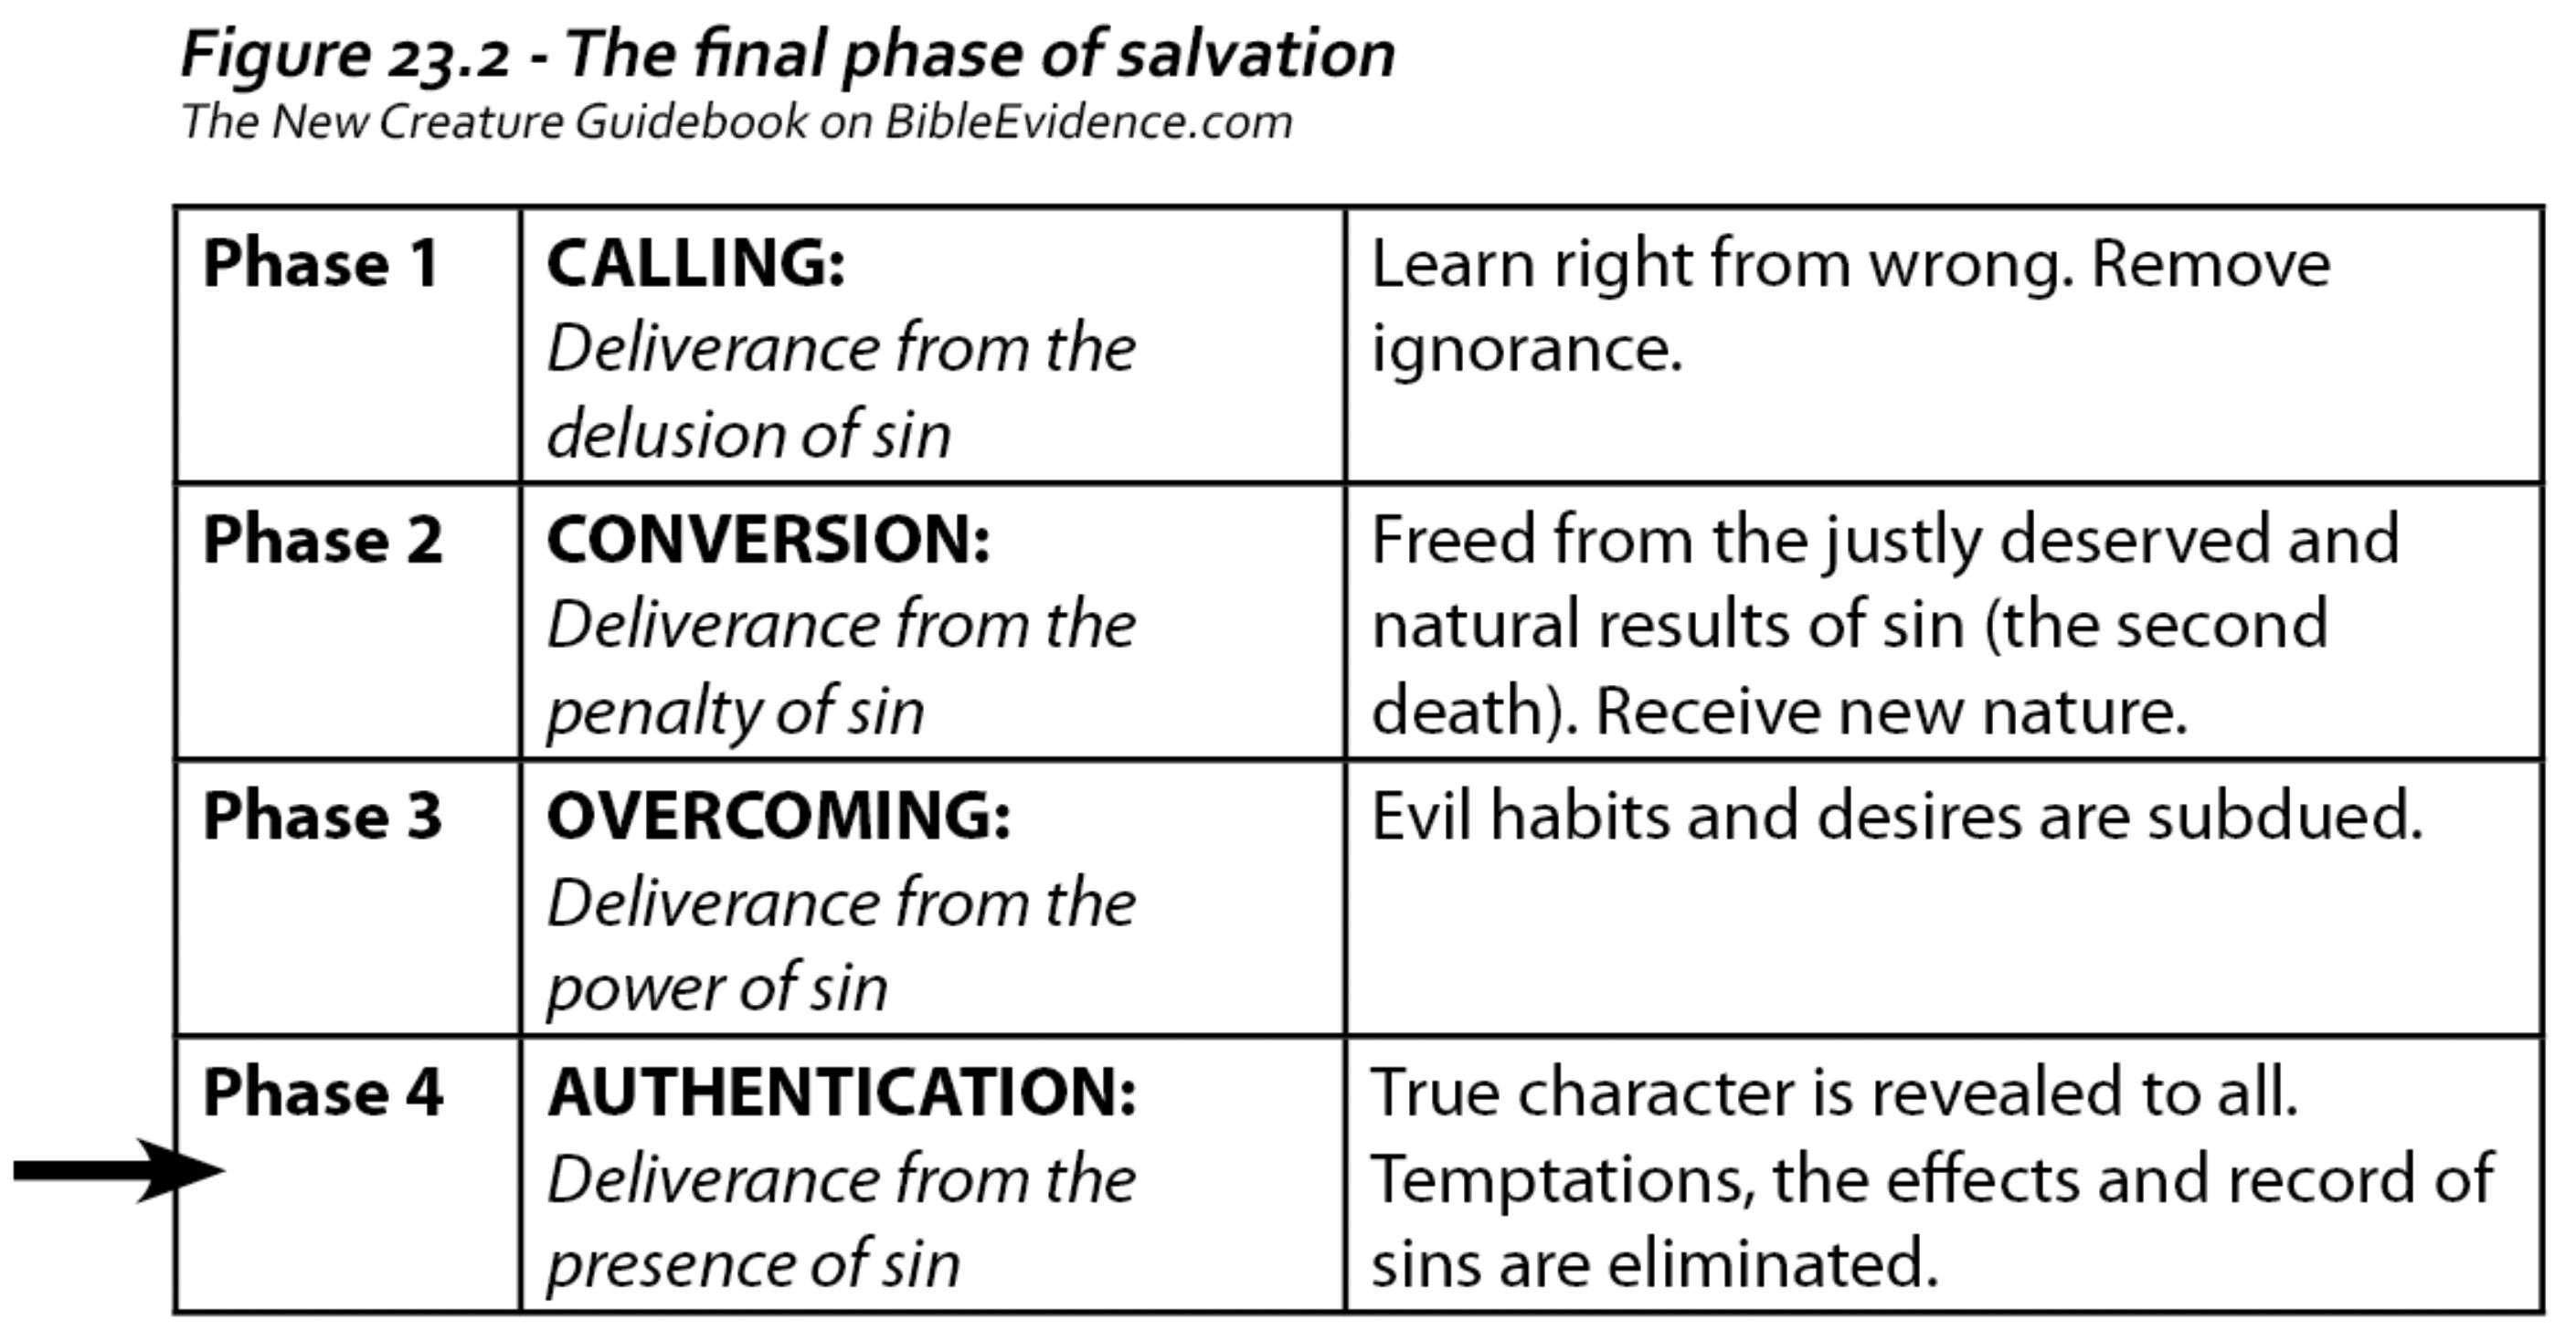 The Final Phase of Salvation